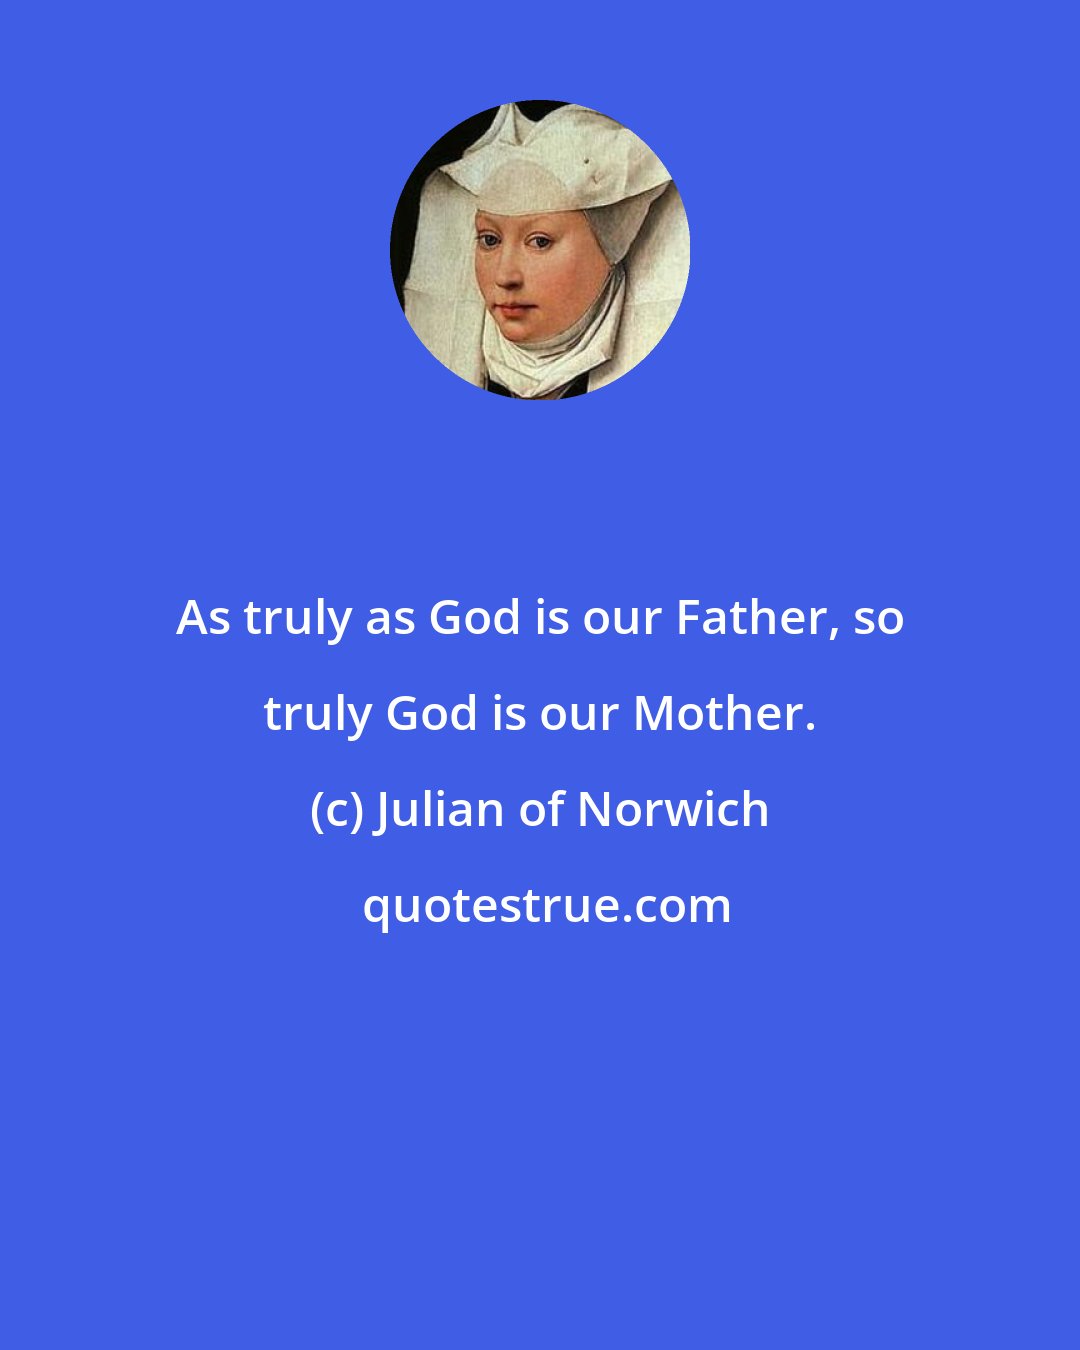 Julian of Norwich: As truly as God is our Father, so truly God is our Mother.